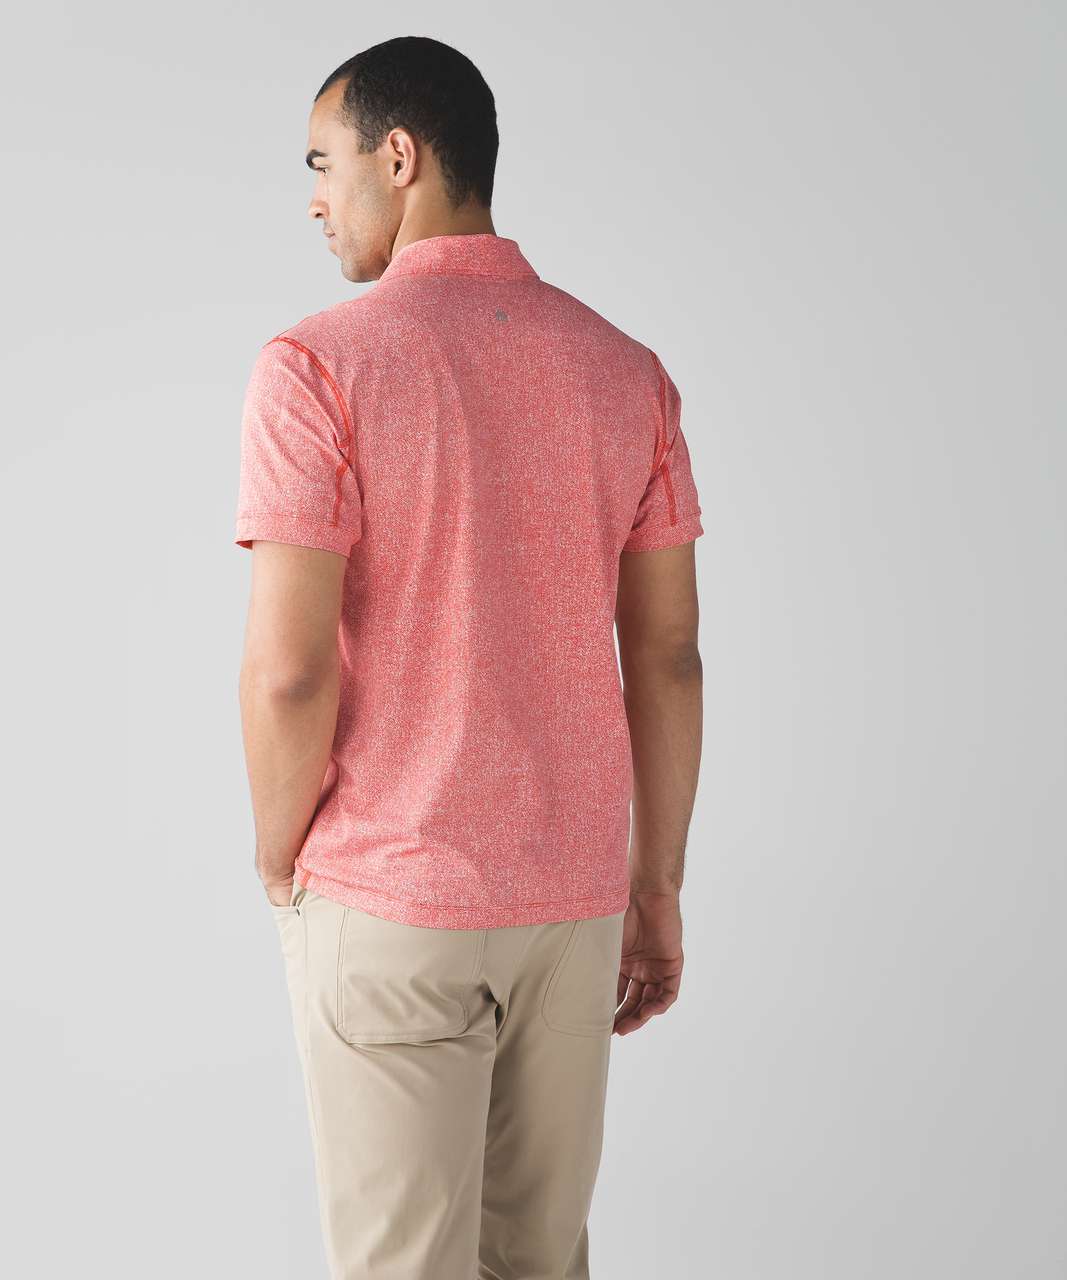 Lululemon Propel Polo - Linen Texture White Prince Red